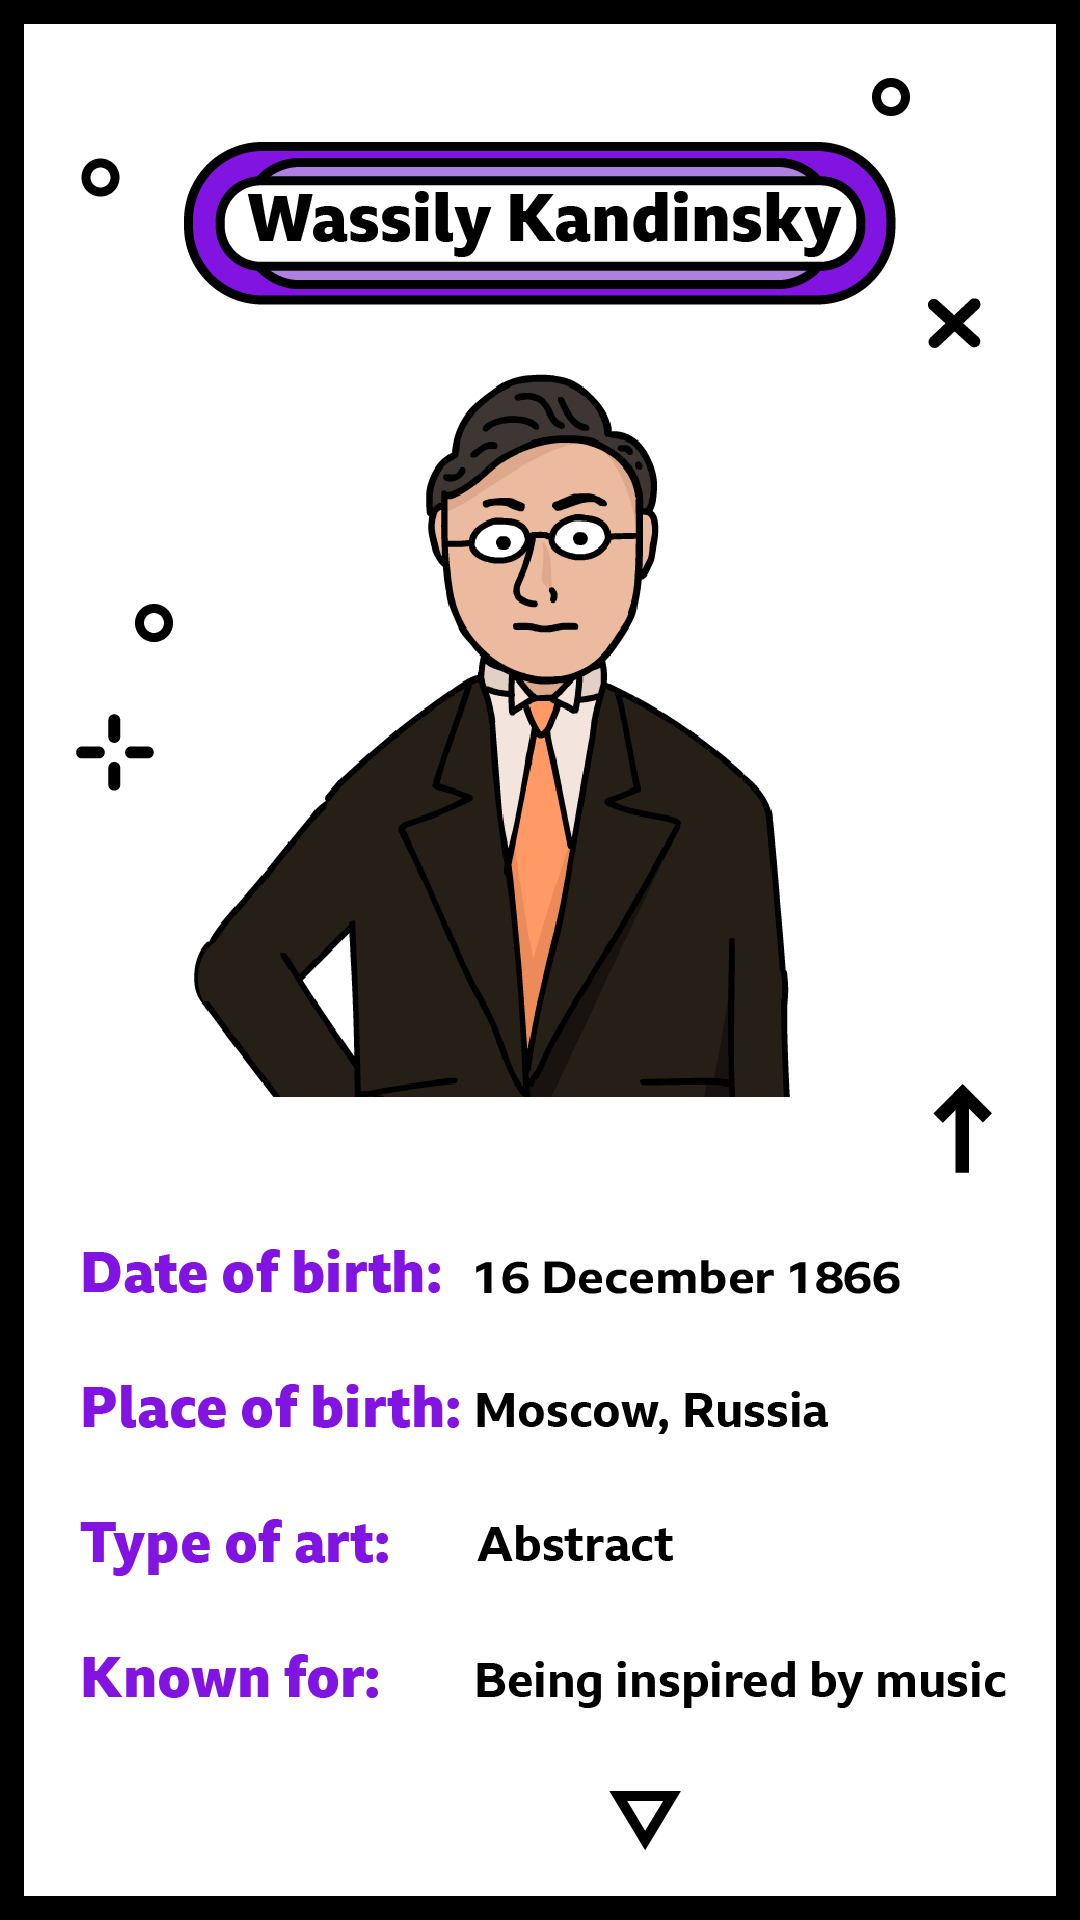 Details on Kandinsky's date and place of birth, his type of art and what he's known for